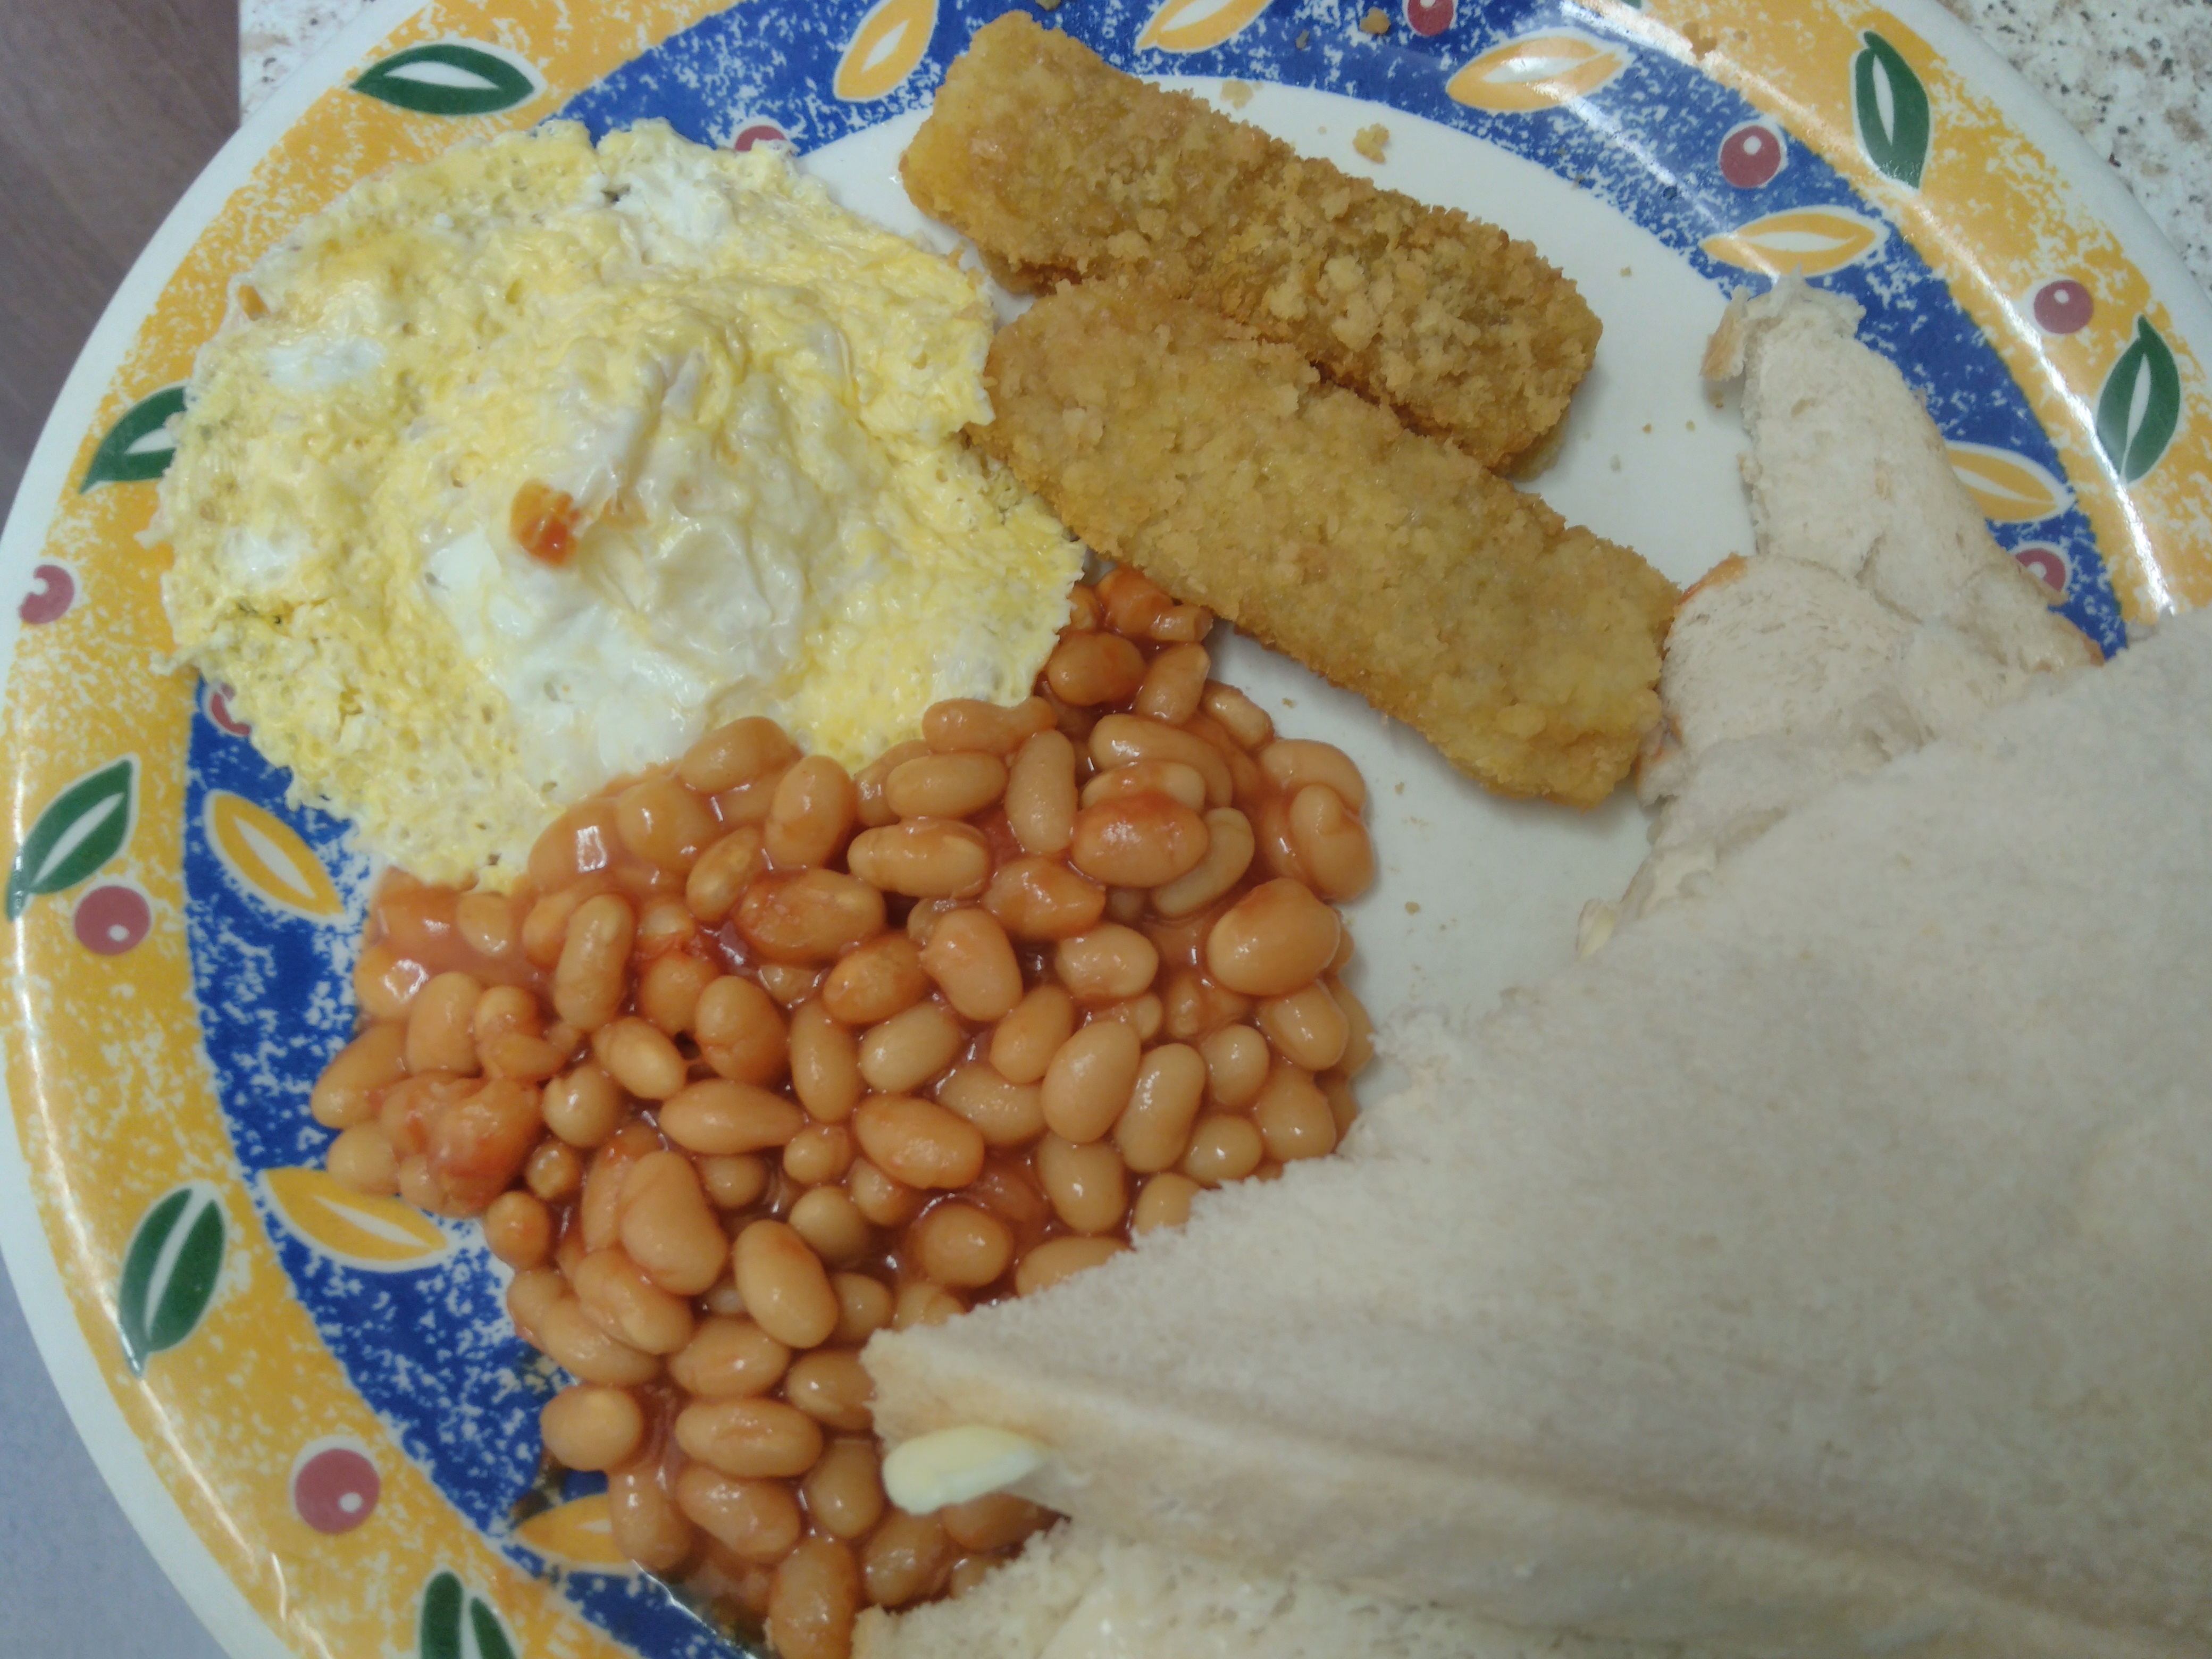 beans, egg and fish fingers